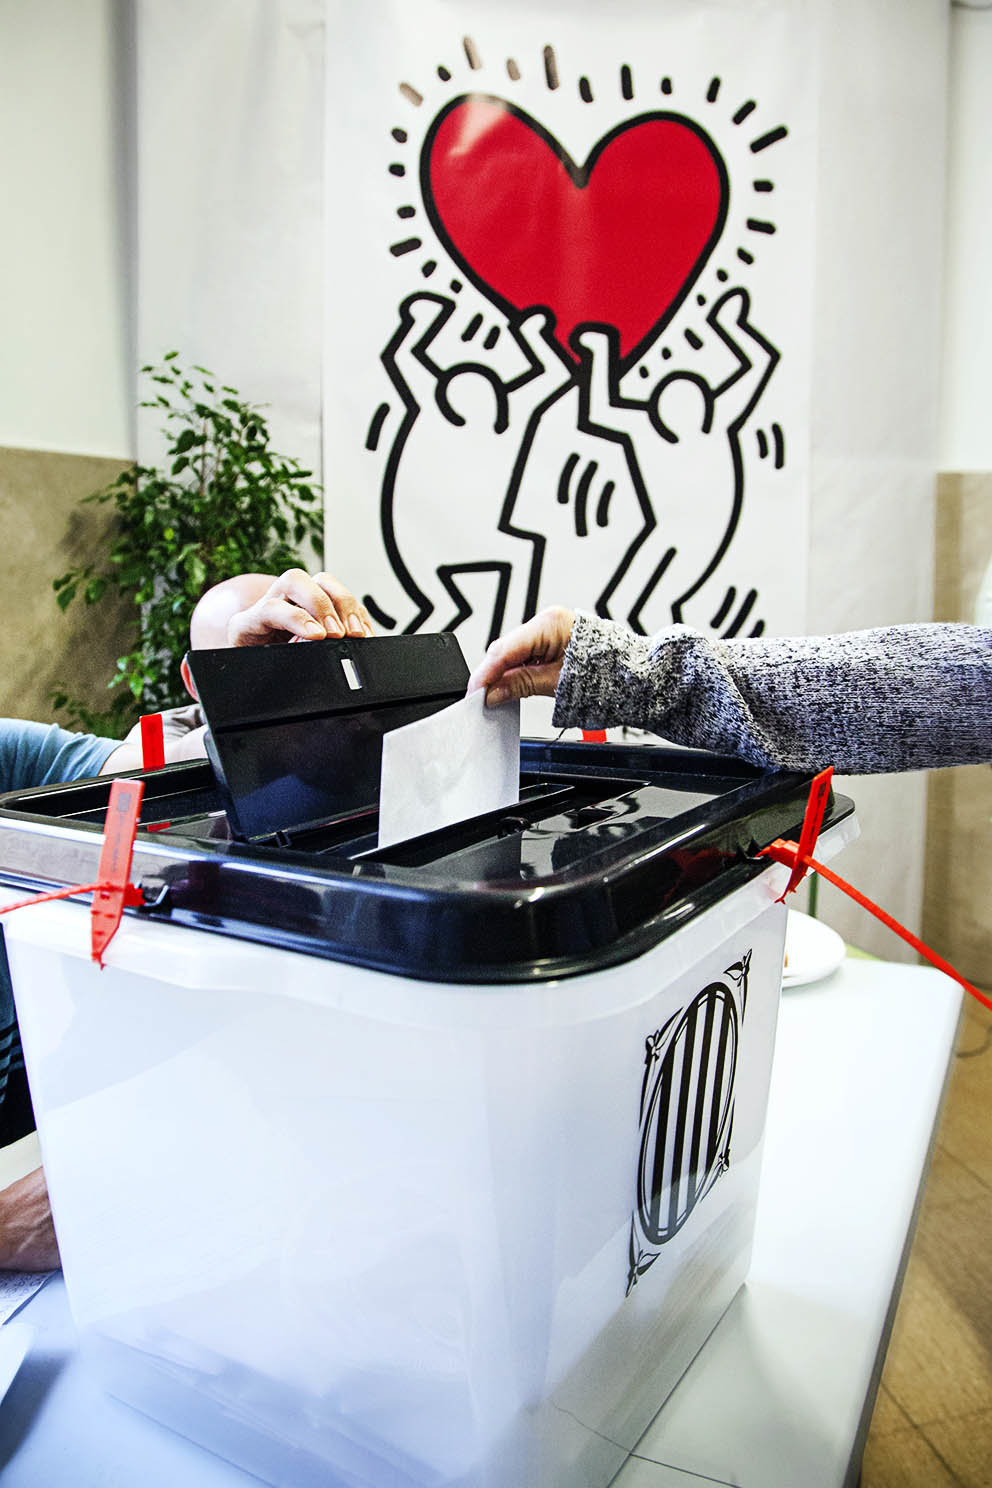 A woman votes excited in the referendum of self-determination of Catalonia